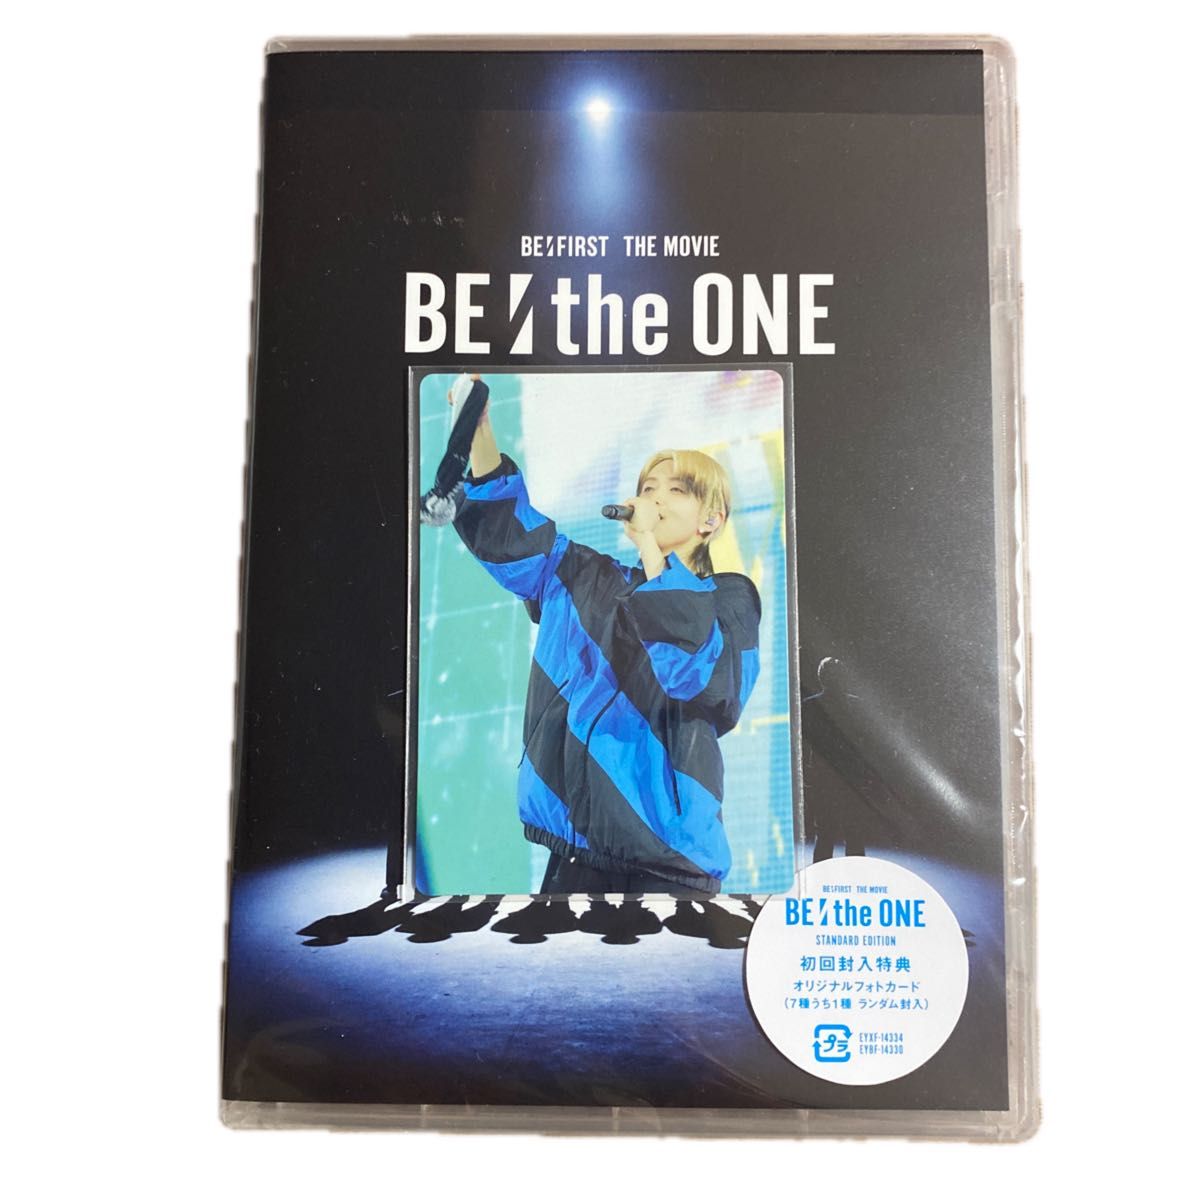 JUNONジュノンフォトカード付き BE:FIRST Blu-ray/BE:the ONE-STANDARD EDITION